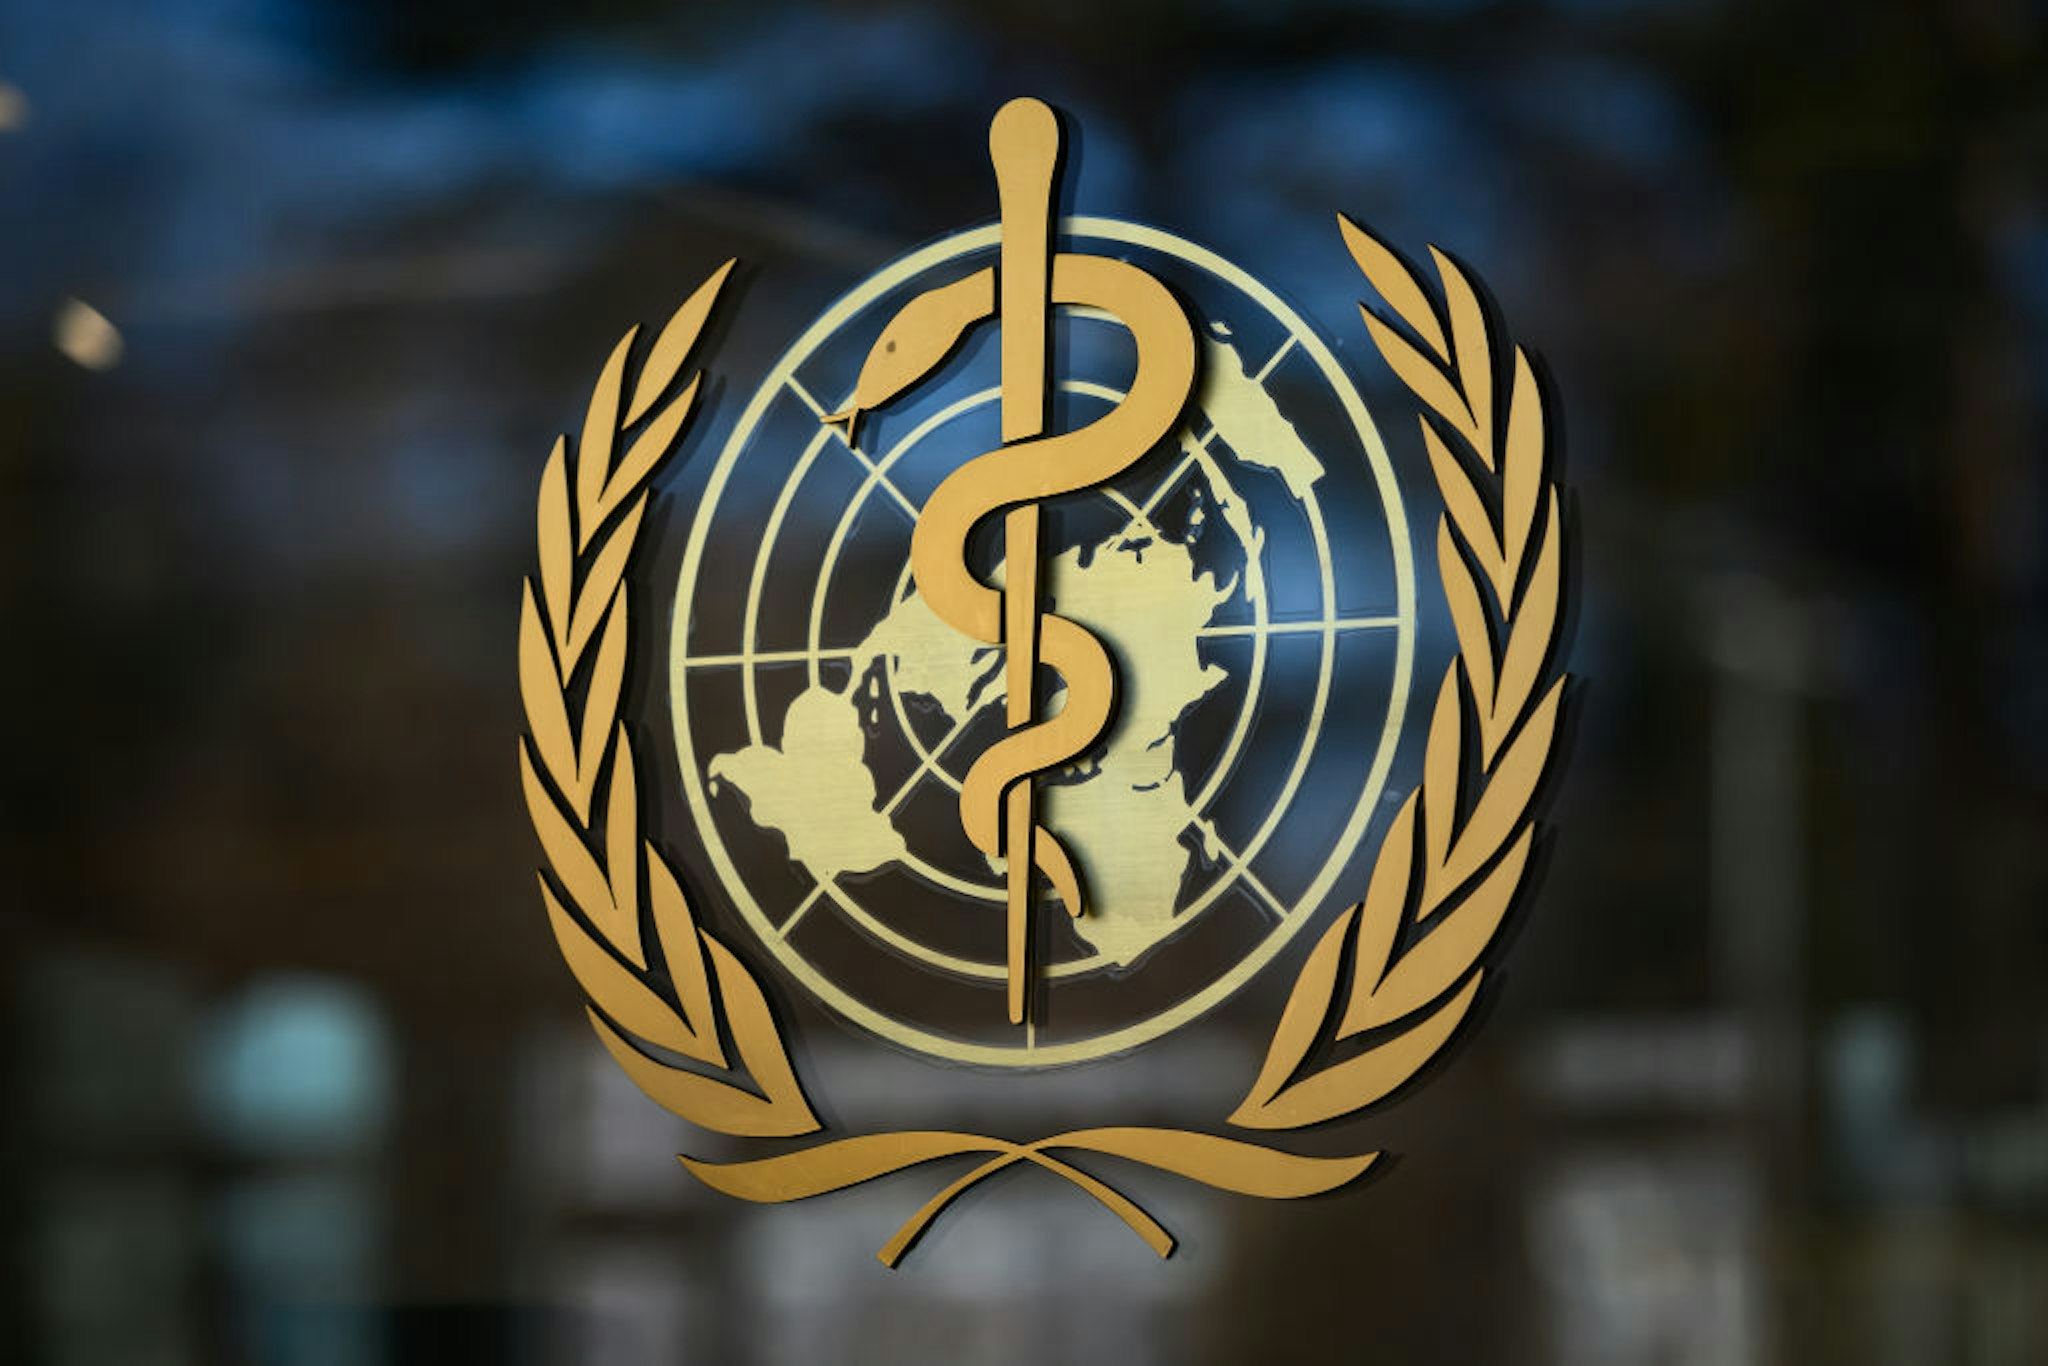 A photo taken on February 24, 2020 shows the logo of the World Health Organization (WHO) at their headquarters in Geneva. - Fears of a global coronavirus pandemic deepened on Monday as new deaths and infections in Europe, the Middle East and Asia triggered more drastic efforts to stop people travelling. (Photo by Fabrice COFFRINI / AFP) (Photo by FABRICE COFFRINI/AFP via Getty Images)